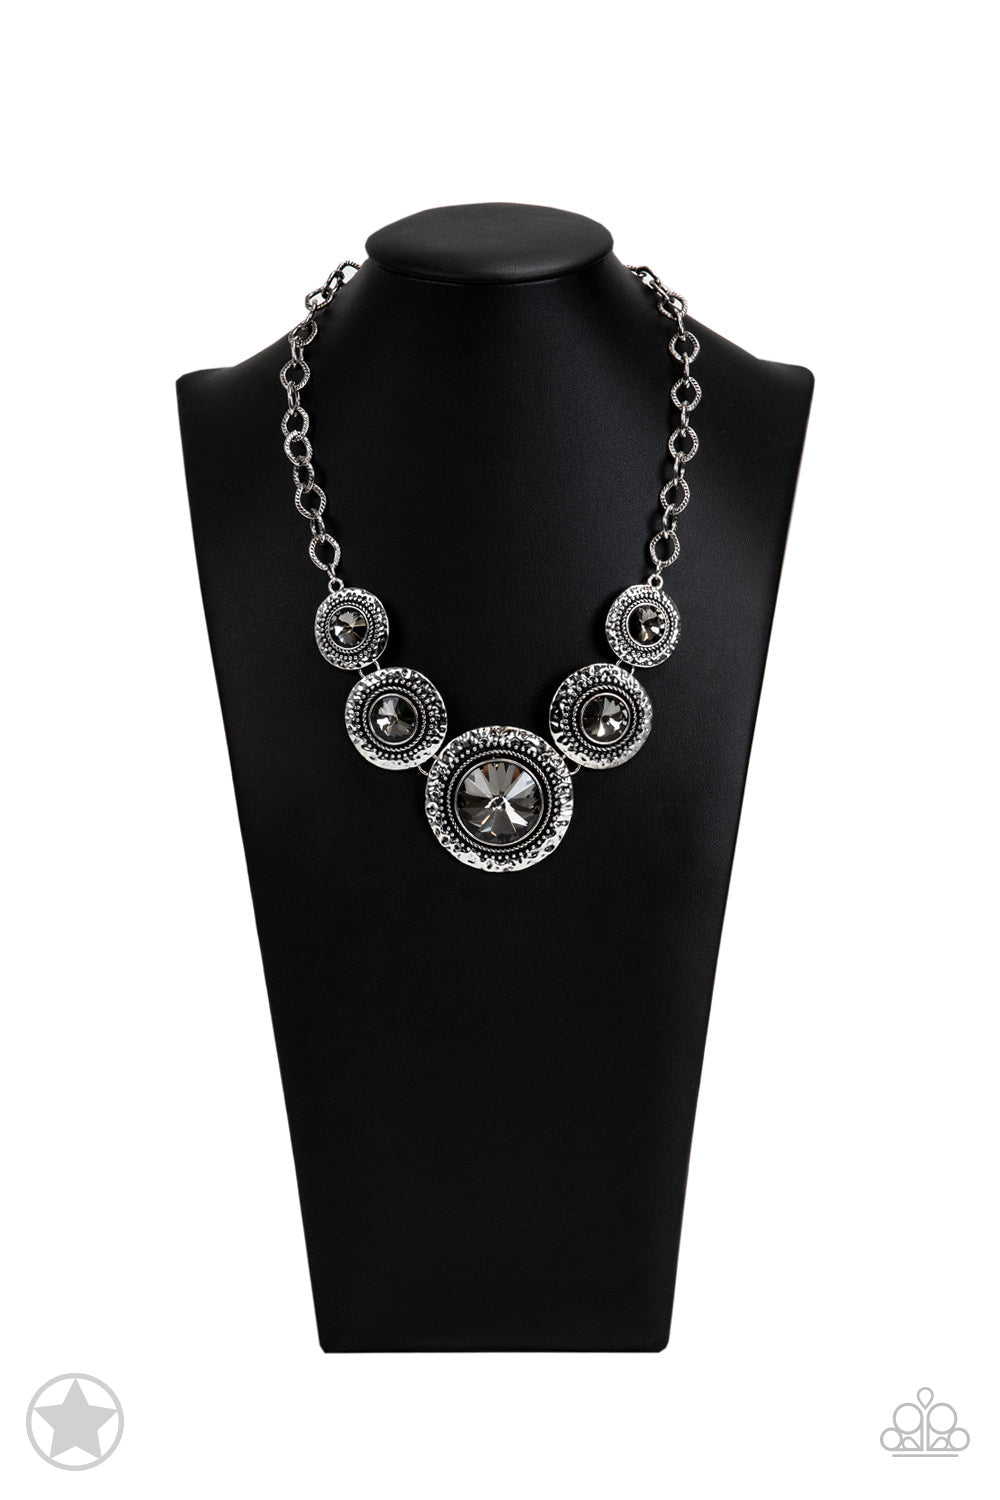 Global Glamour - Silver Necklace - Paparazzi Accessories - dramatically oversized smoky gems are pressed into the centers of hammered and silver studded frames. The blinding frames link below the collar for a glamorous, statement-making finish. Bejeweled Accessories By Kristie - Trendy fashion jewelry for everyone -